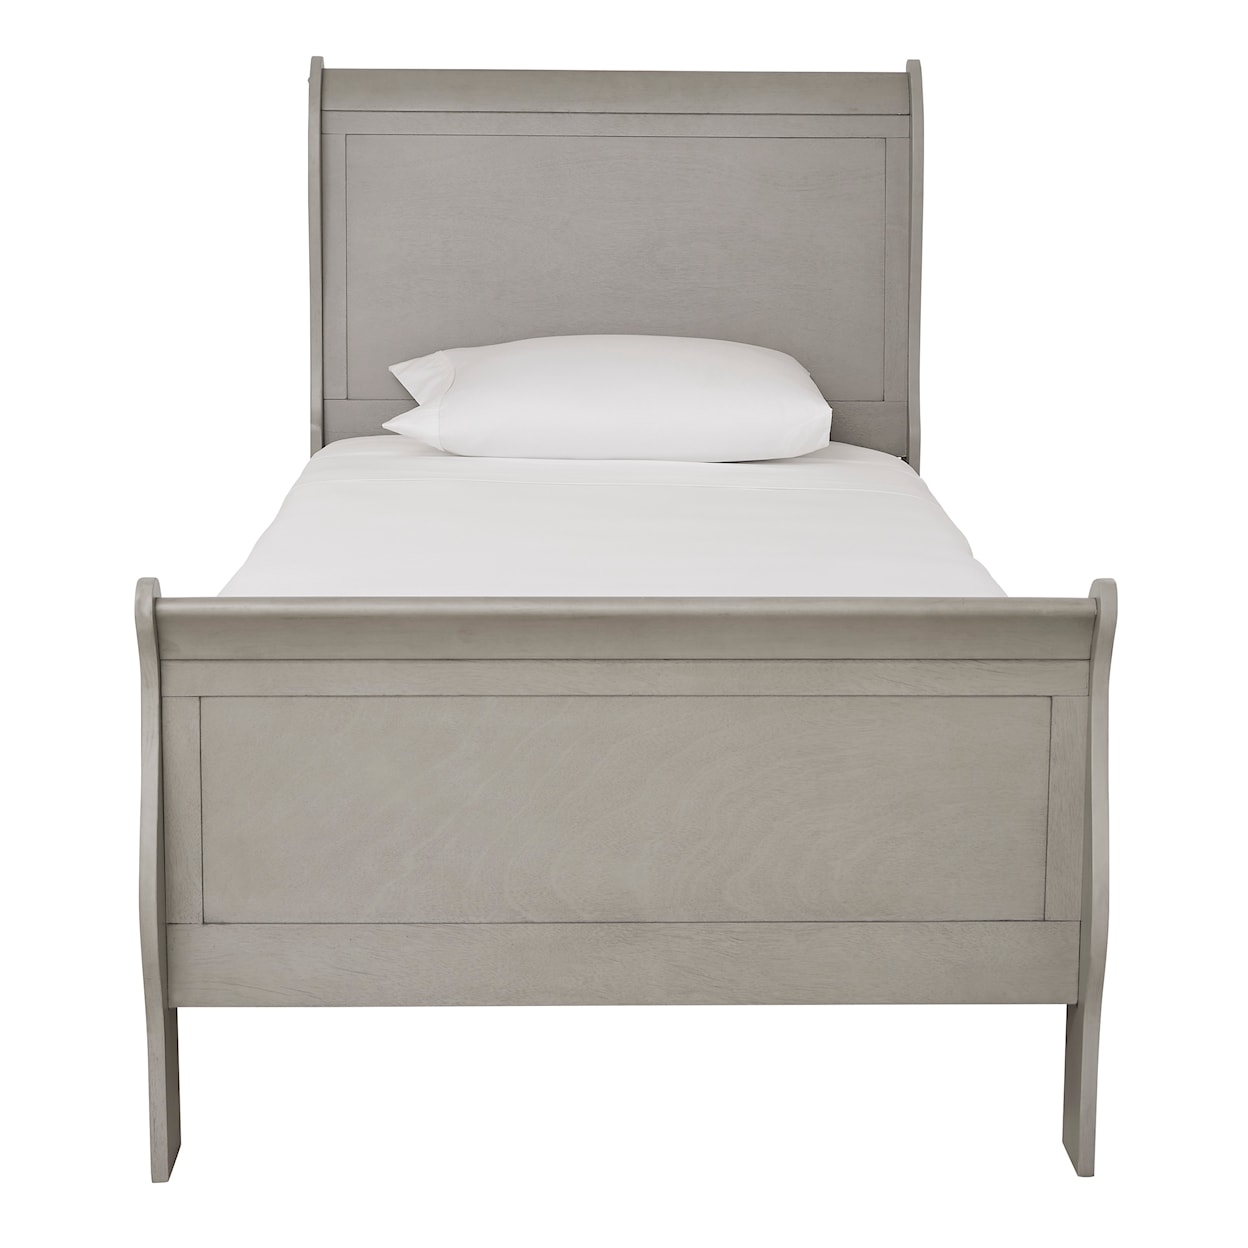 Signature Design by Ashley Kordasky Twin Sleigh Bed